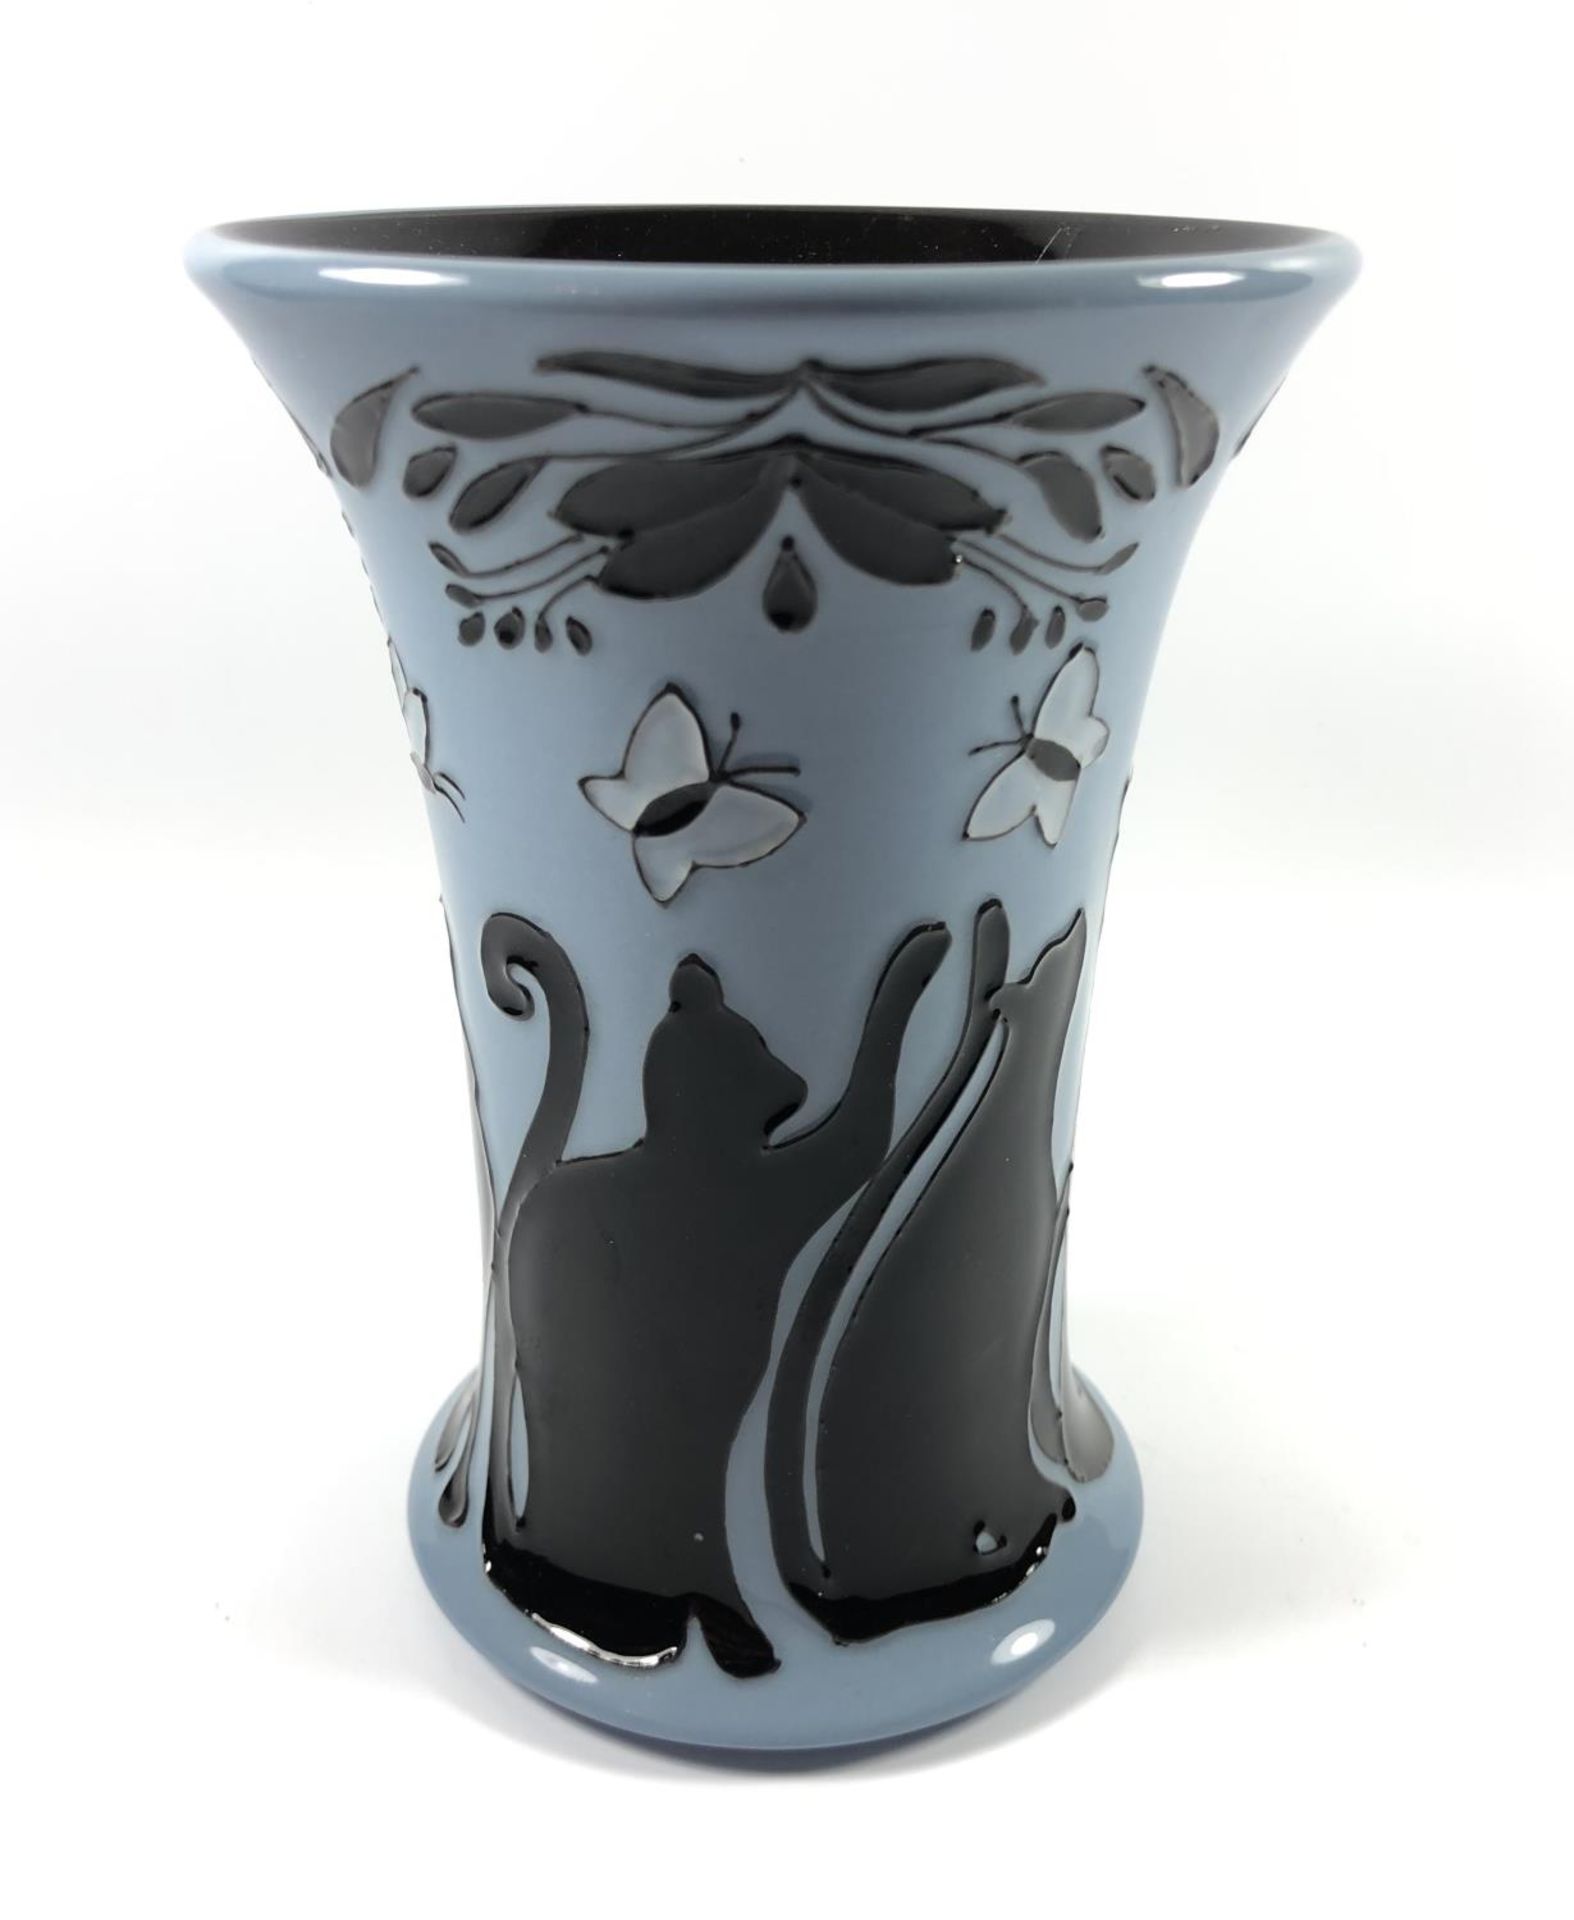 A NUMBERED EDITION MOORCROFT POTTERY 'LUCKY BLACK CAT' VASE, NUMBER 646, HEIGHT 15.5CM, CHIP TO BASE